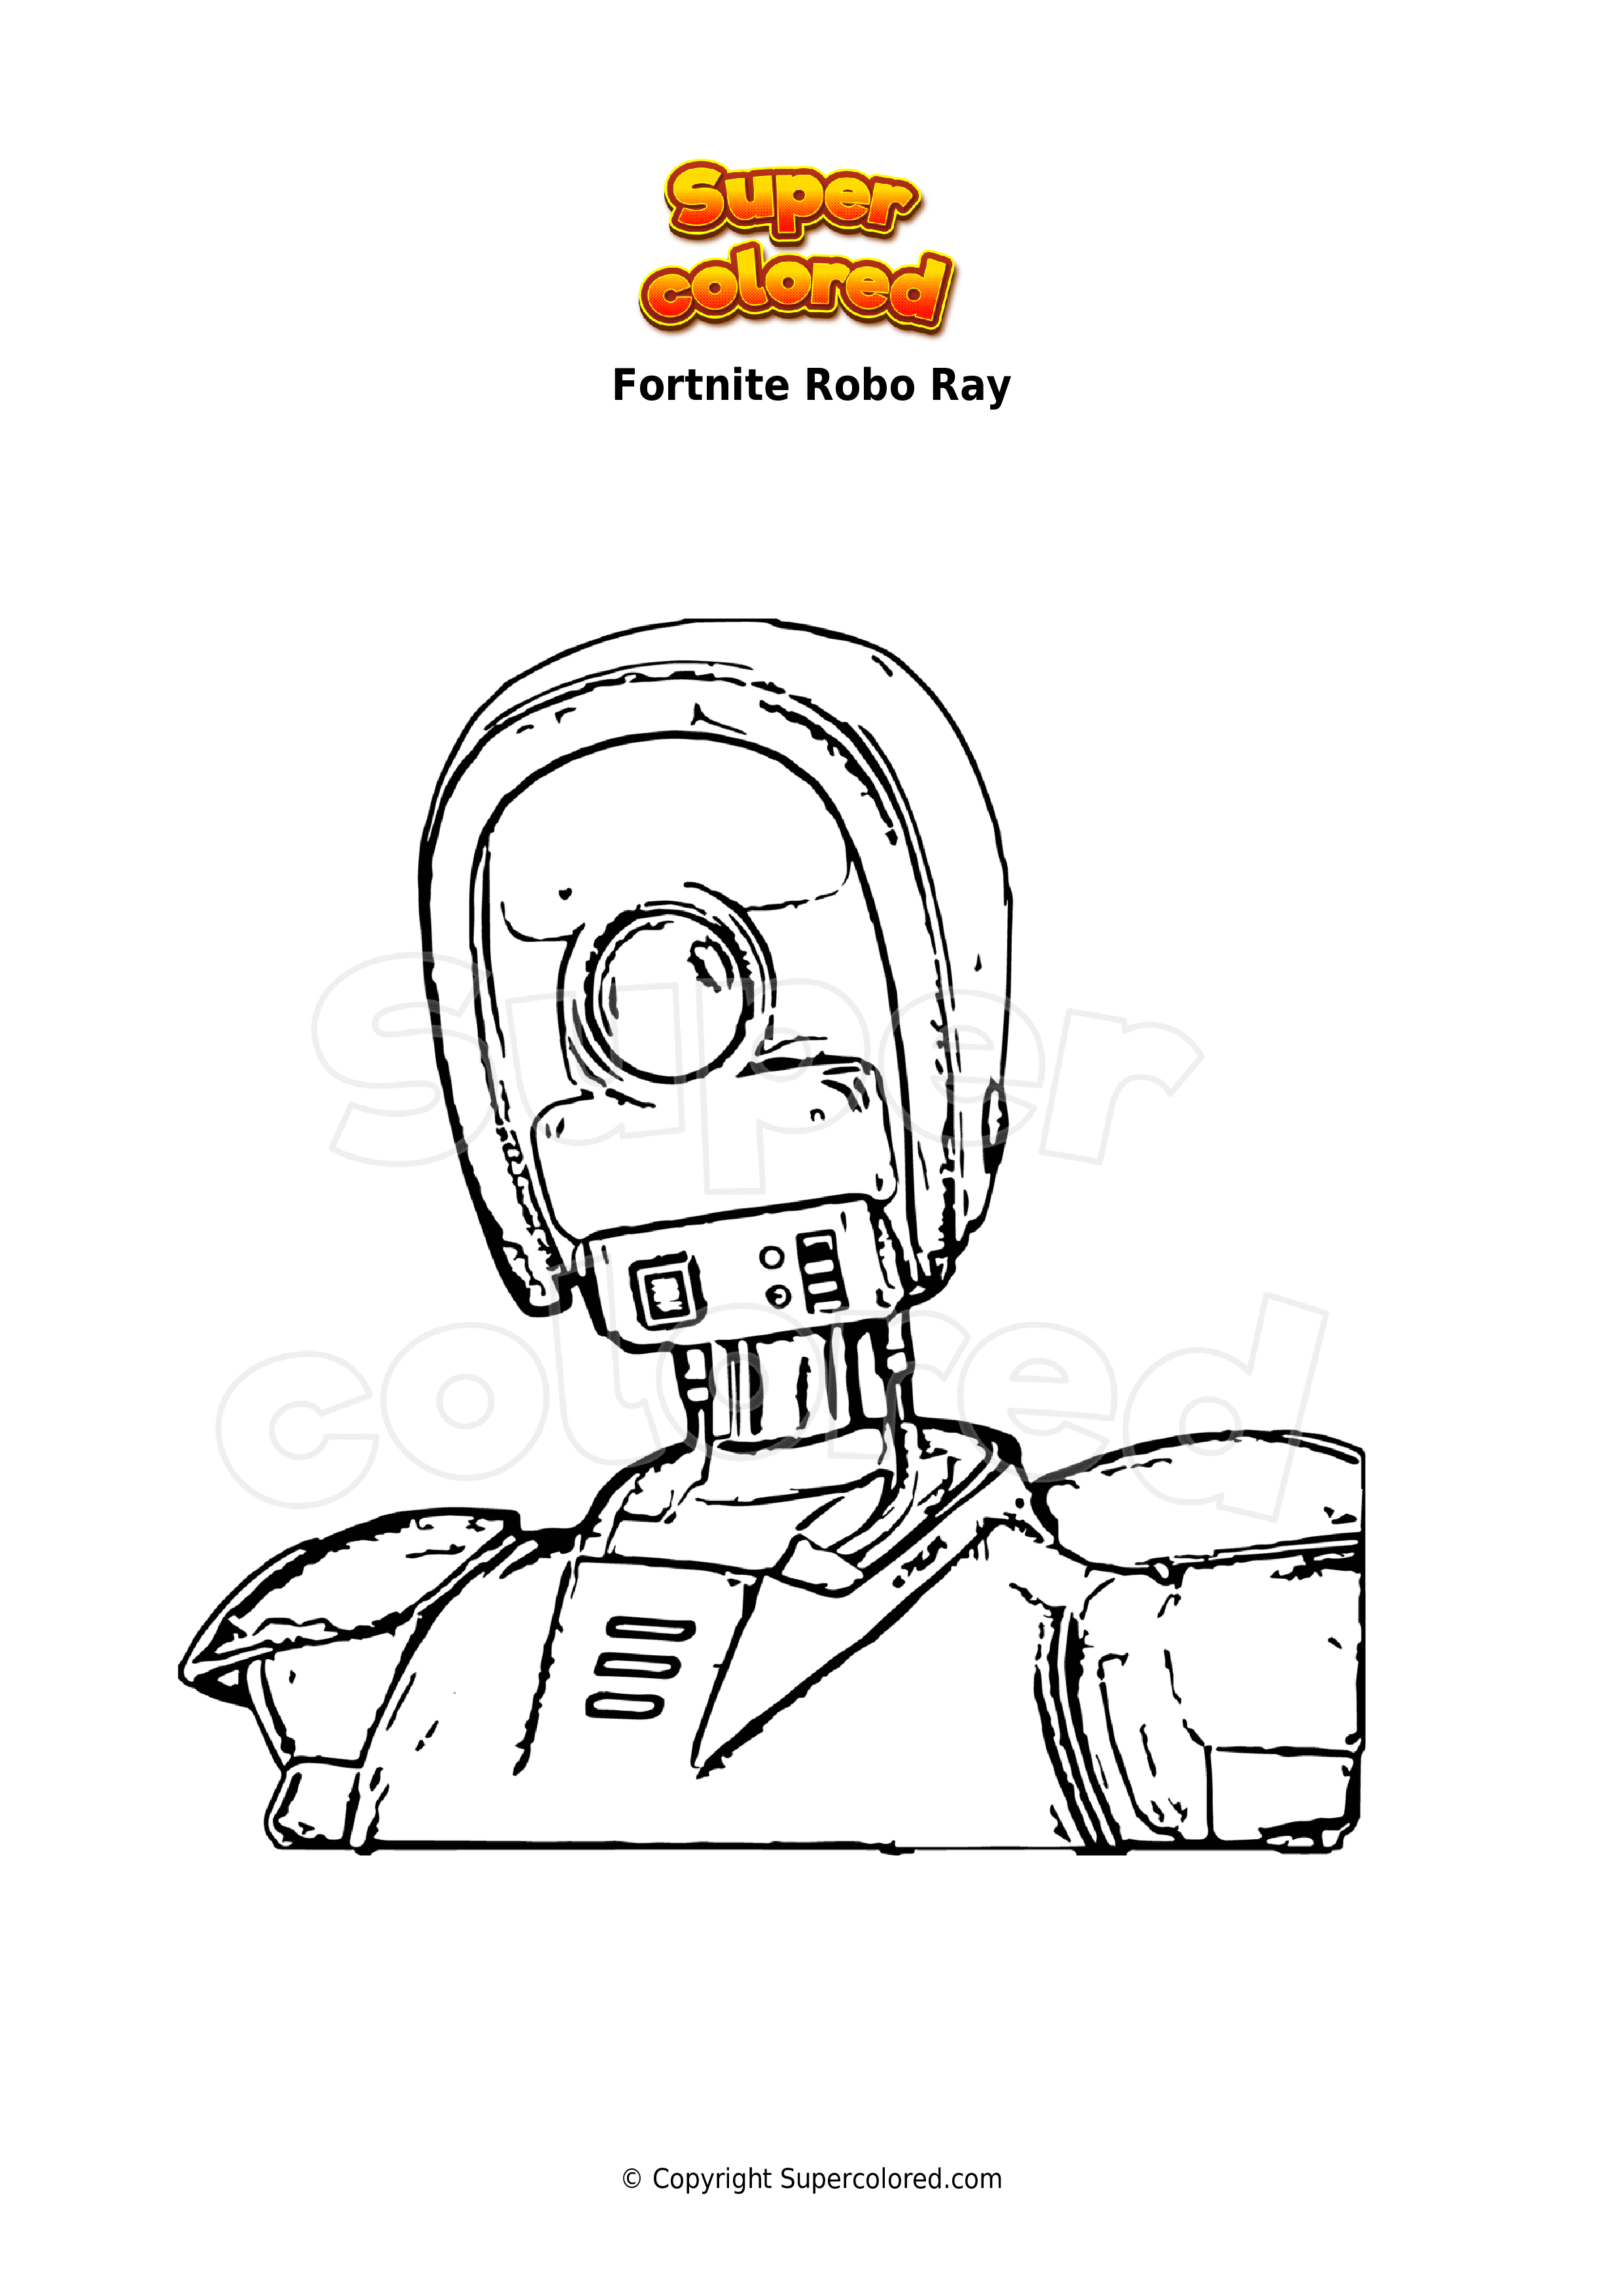 Fortnite Robot Coloring Pages